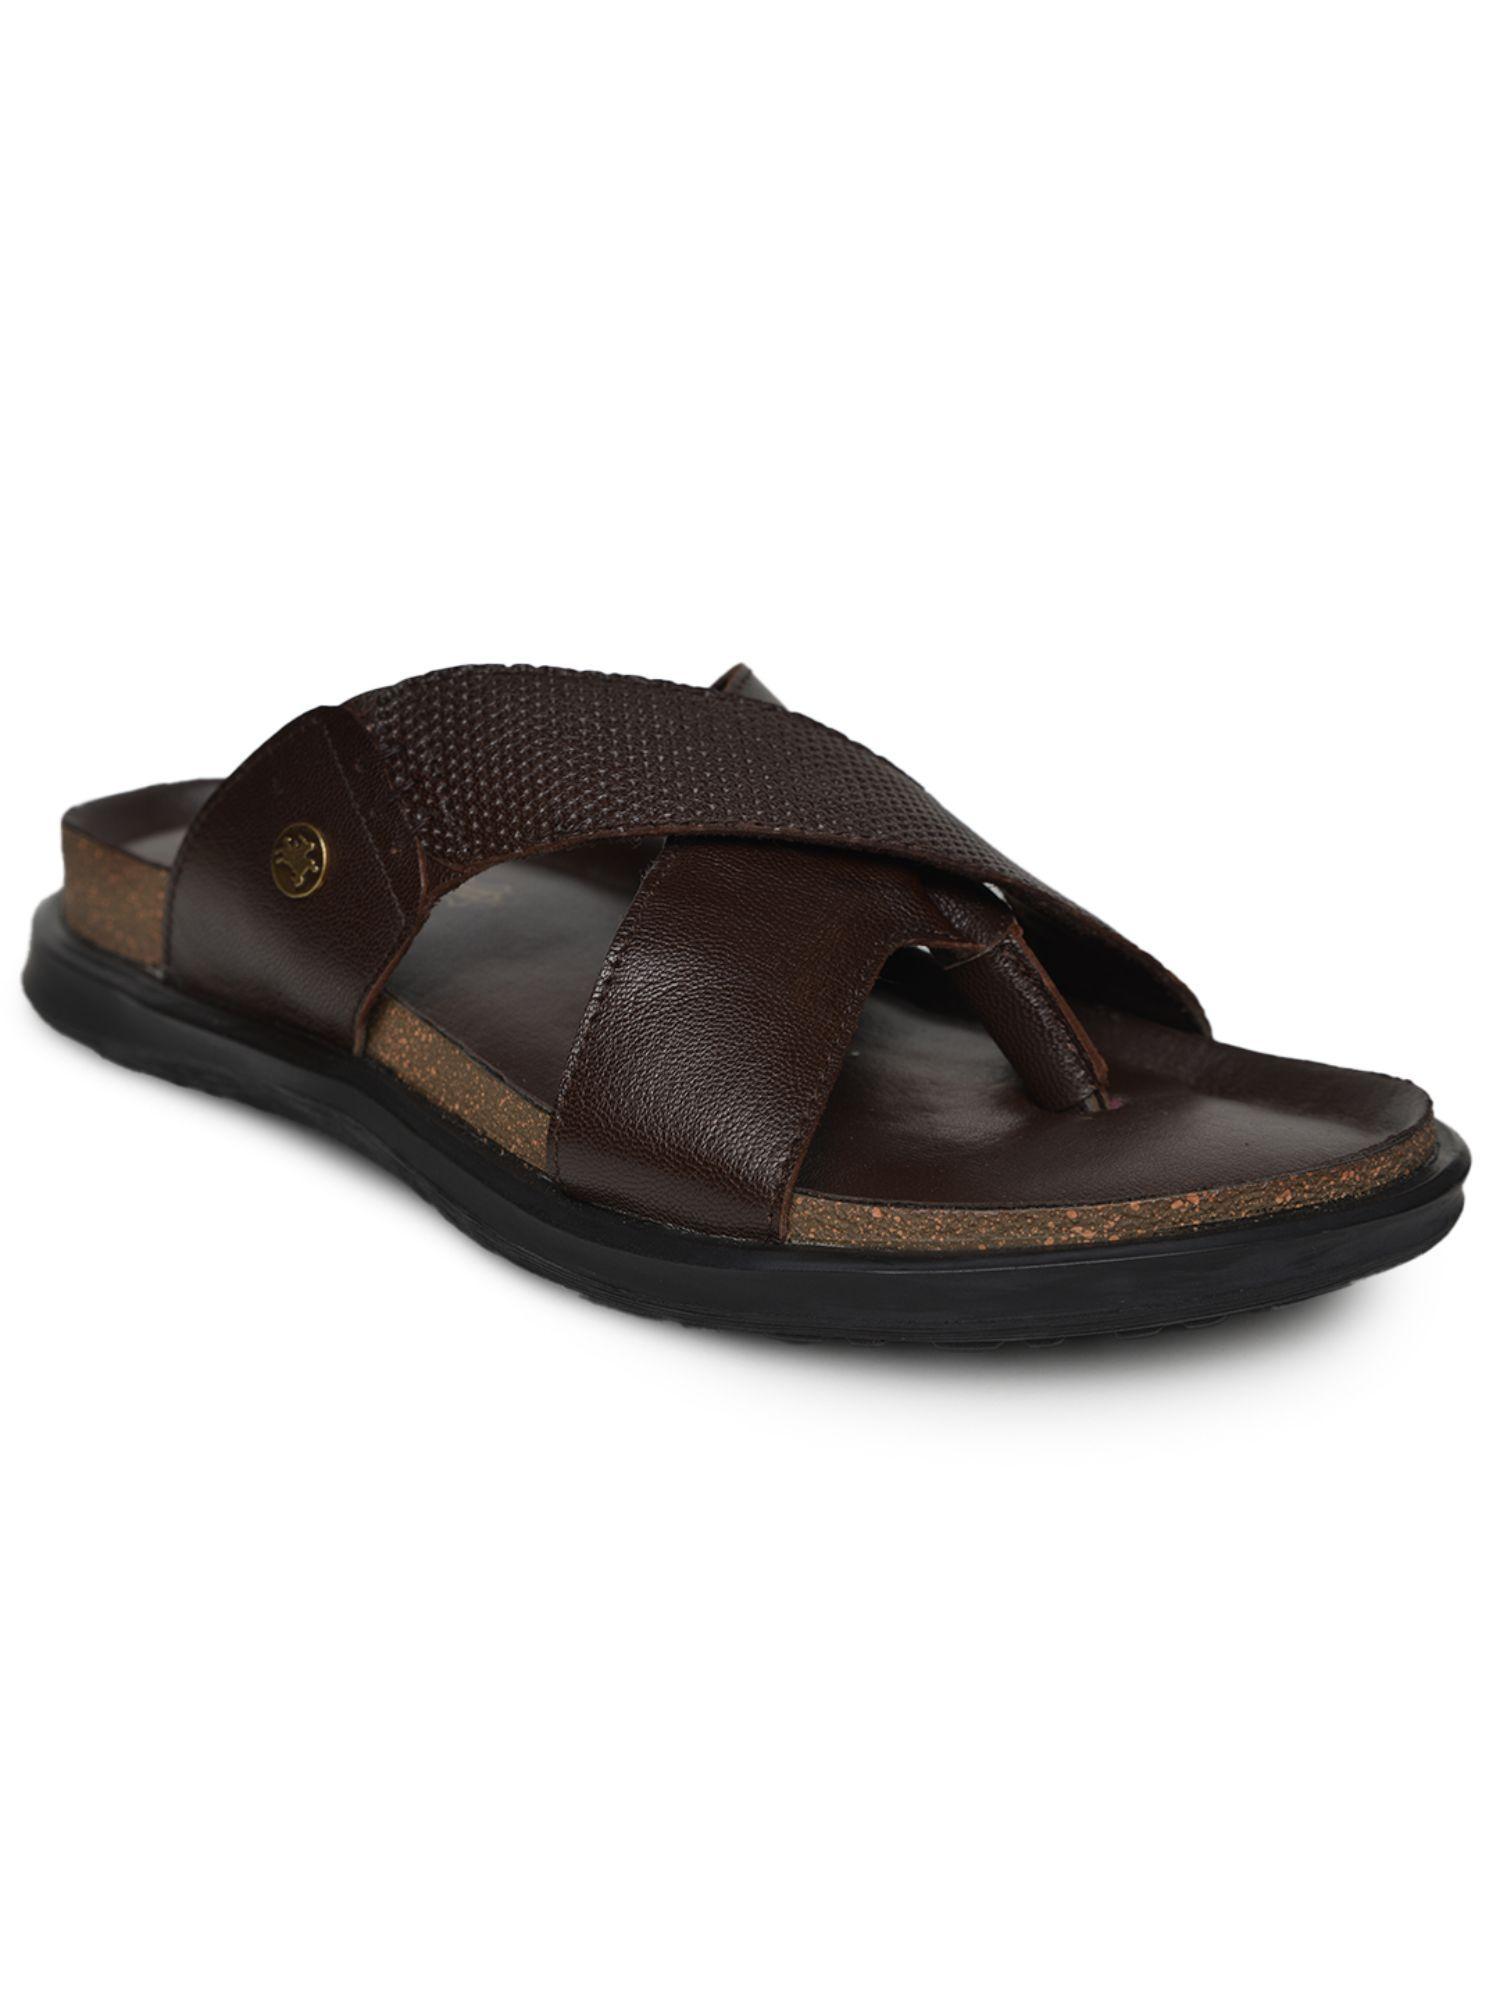 Feest Genuine Leather Casual Sandals for Mens